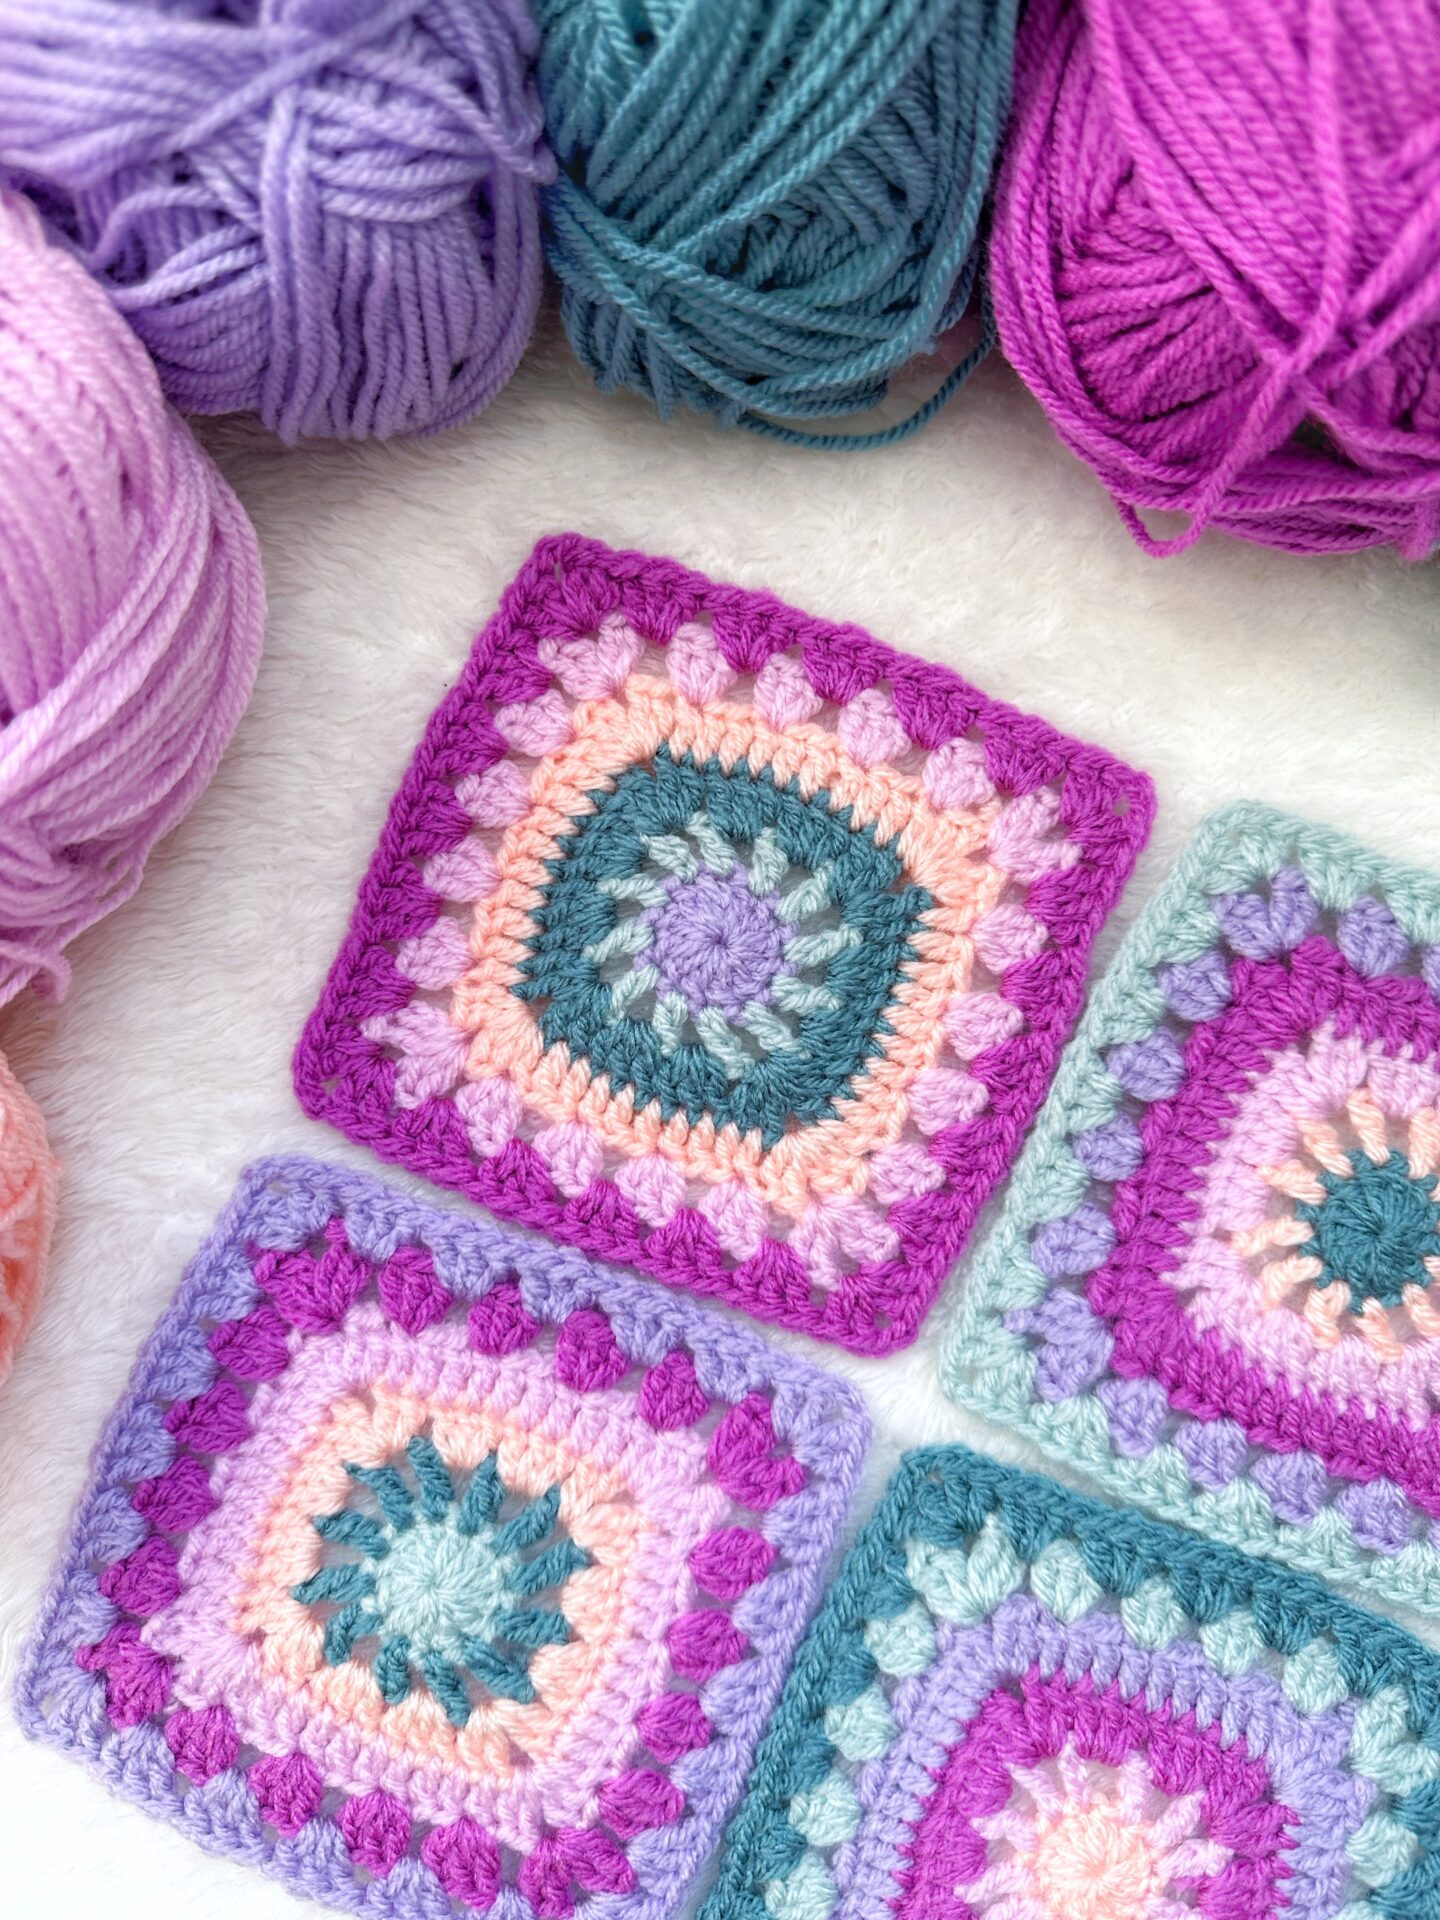 Crochet Granny Square - Free Patterns and Ideas